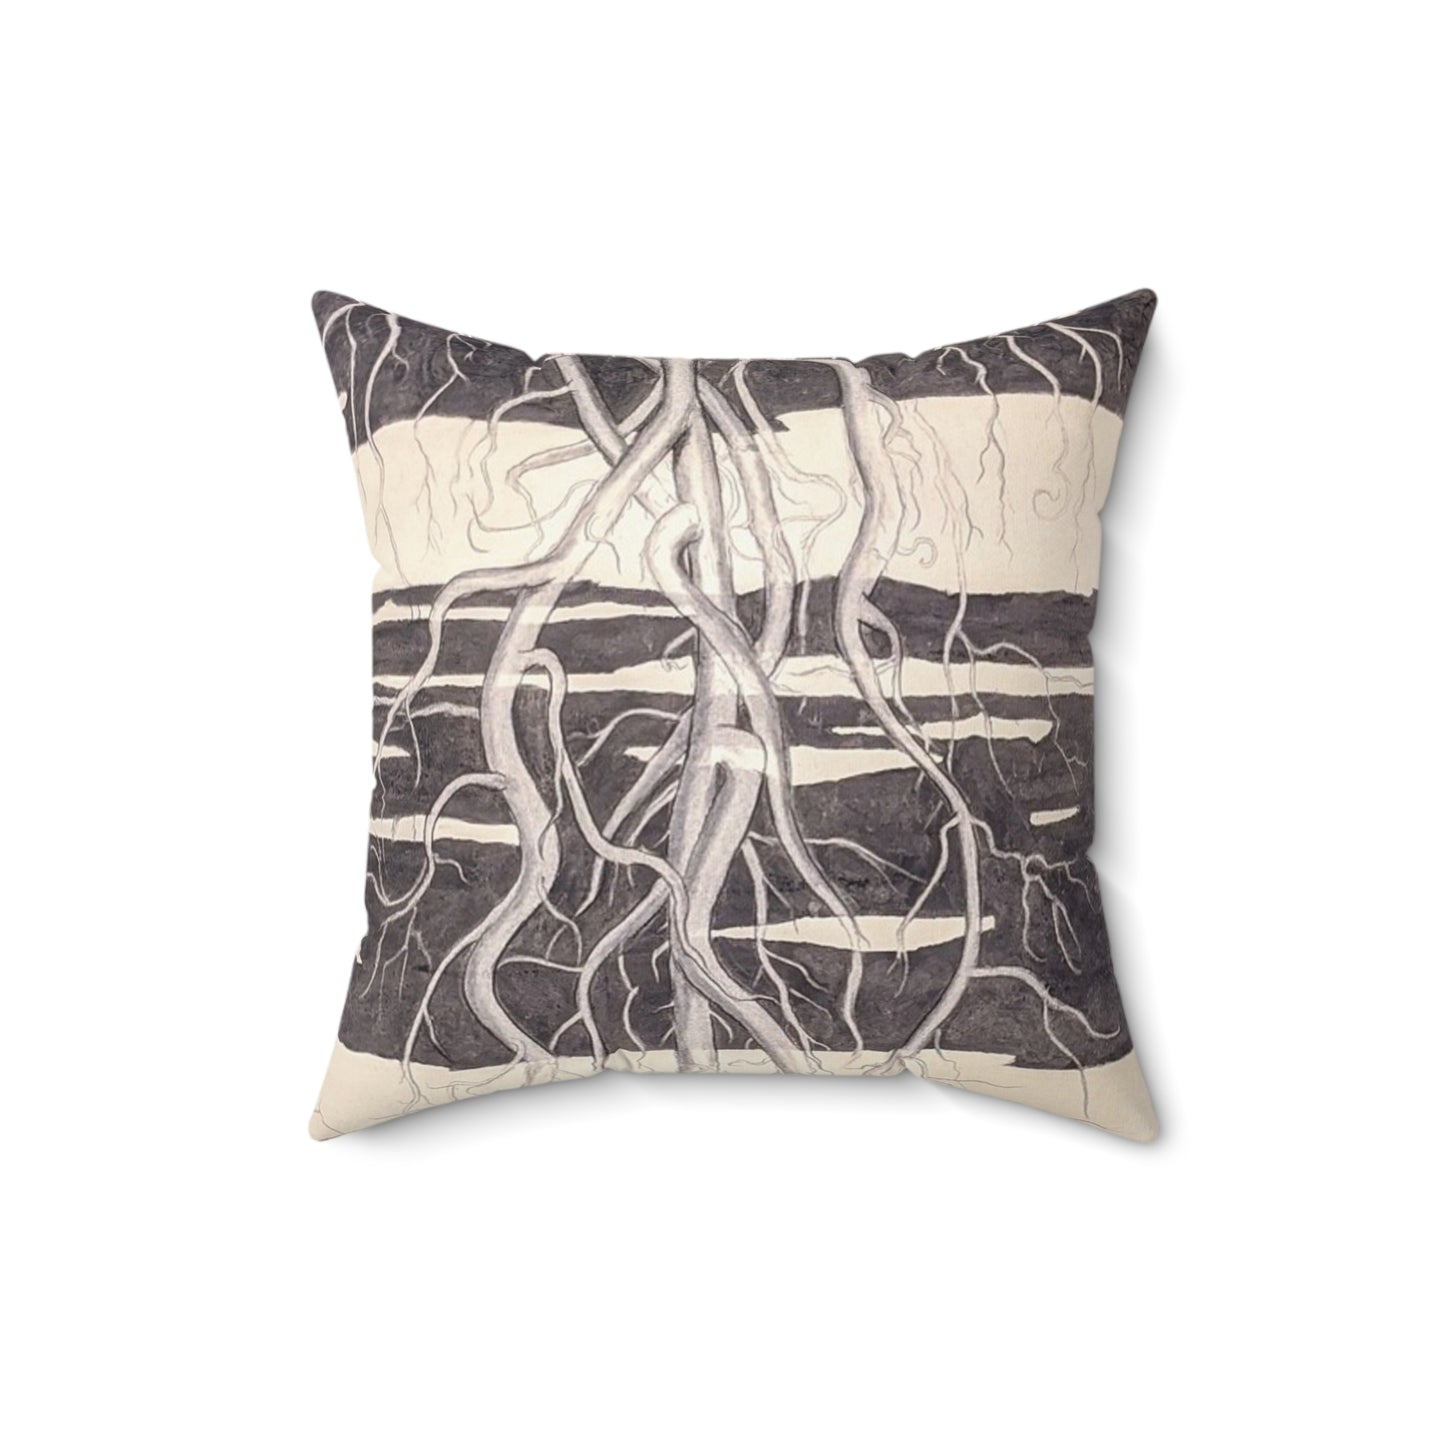 "The Seed" Square Throw Pillow